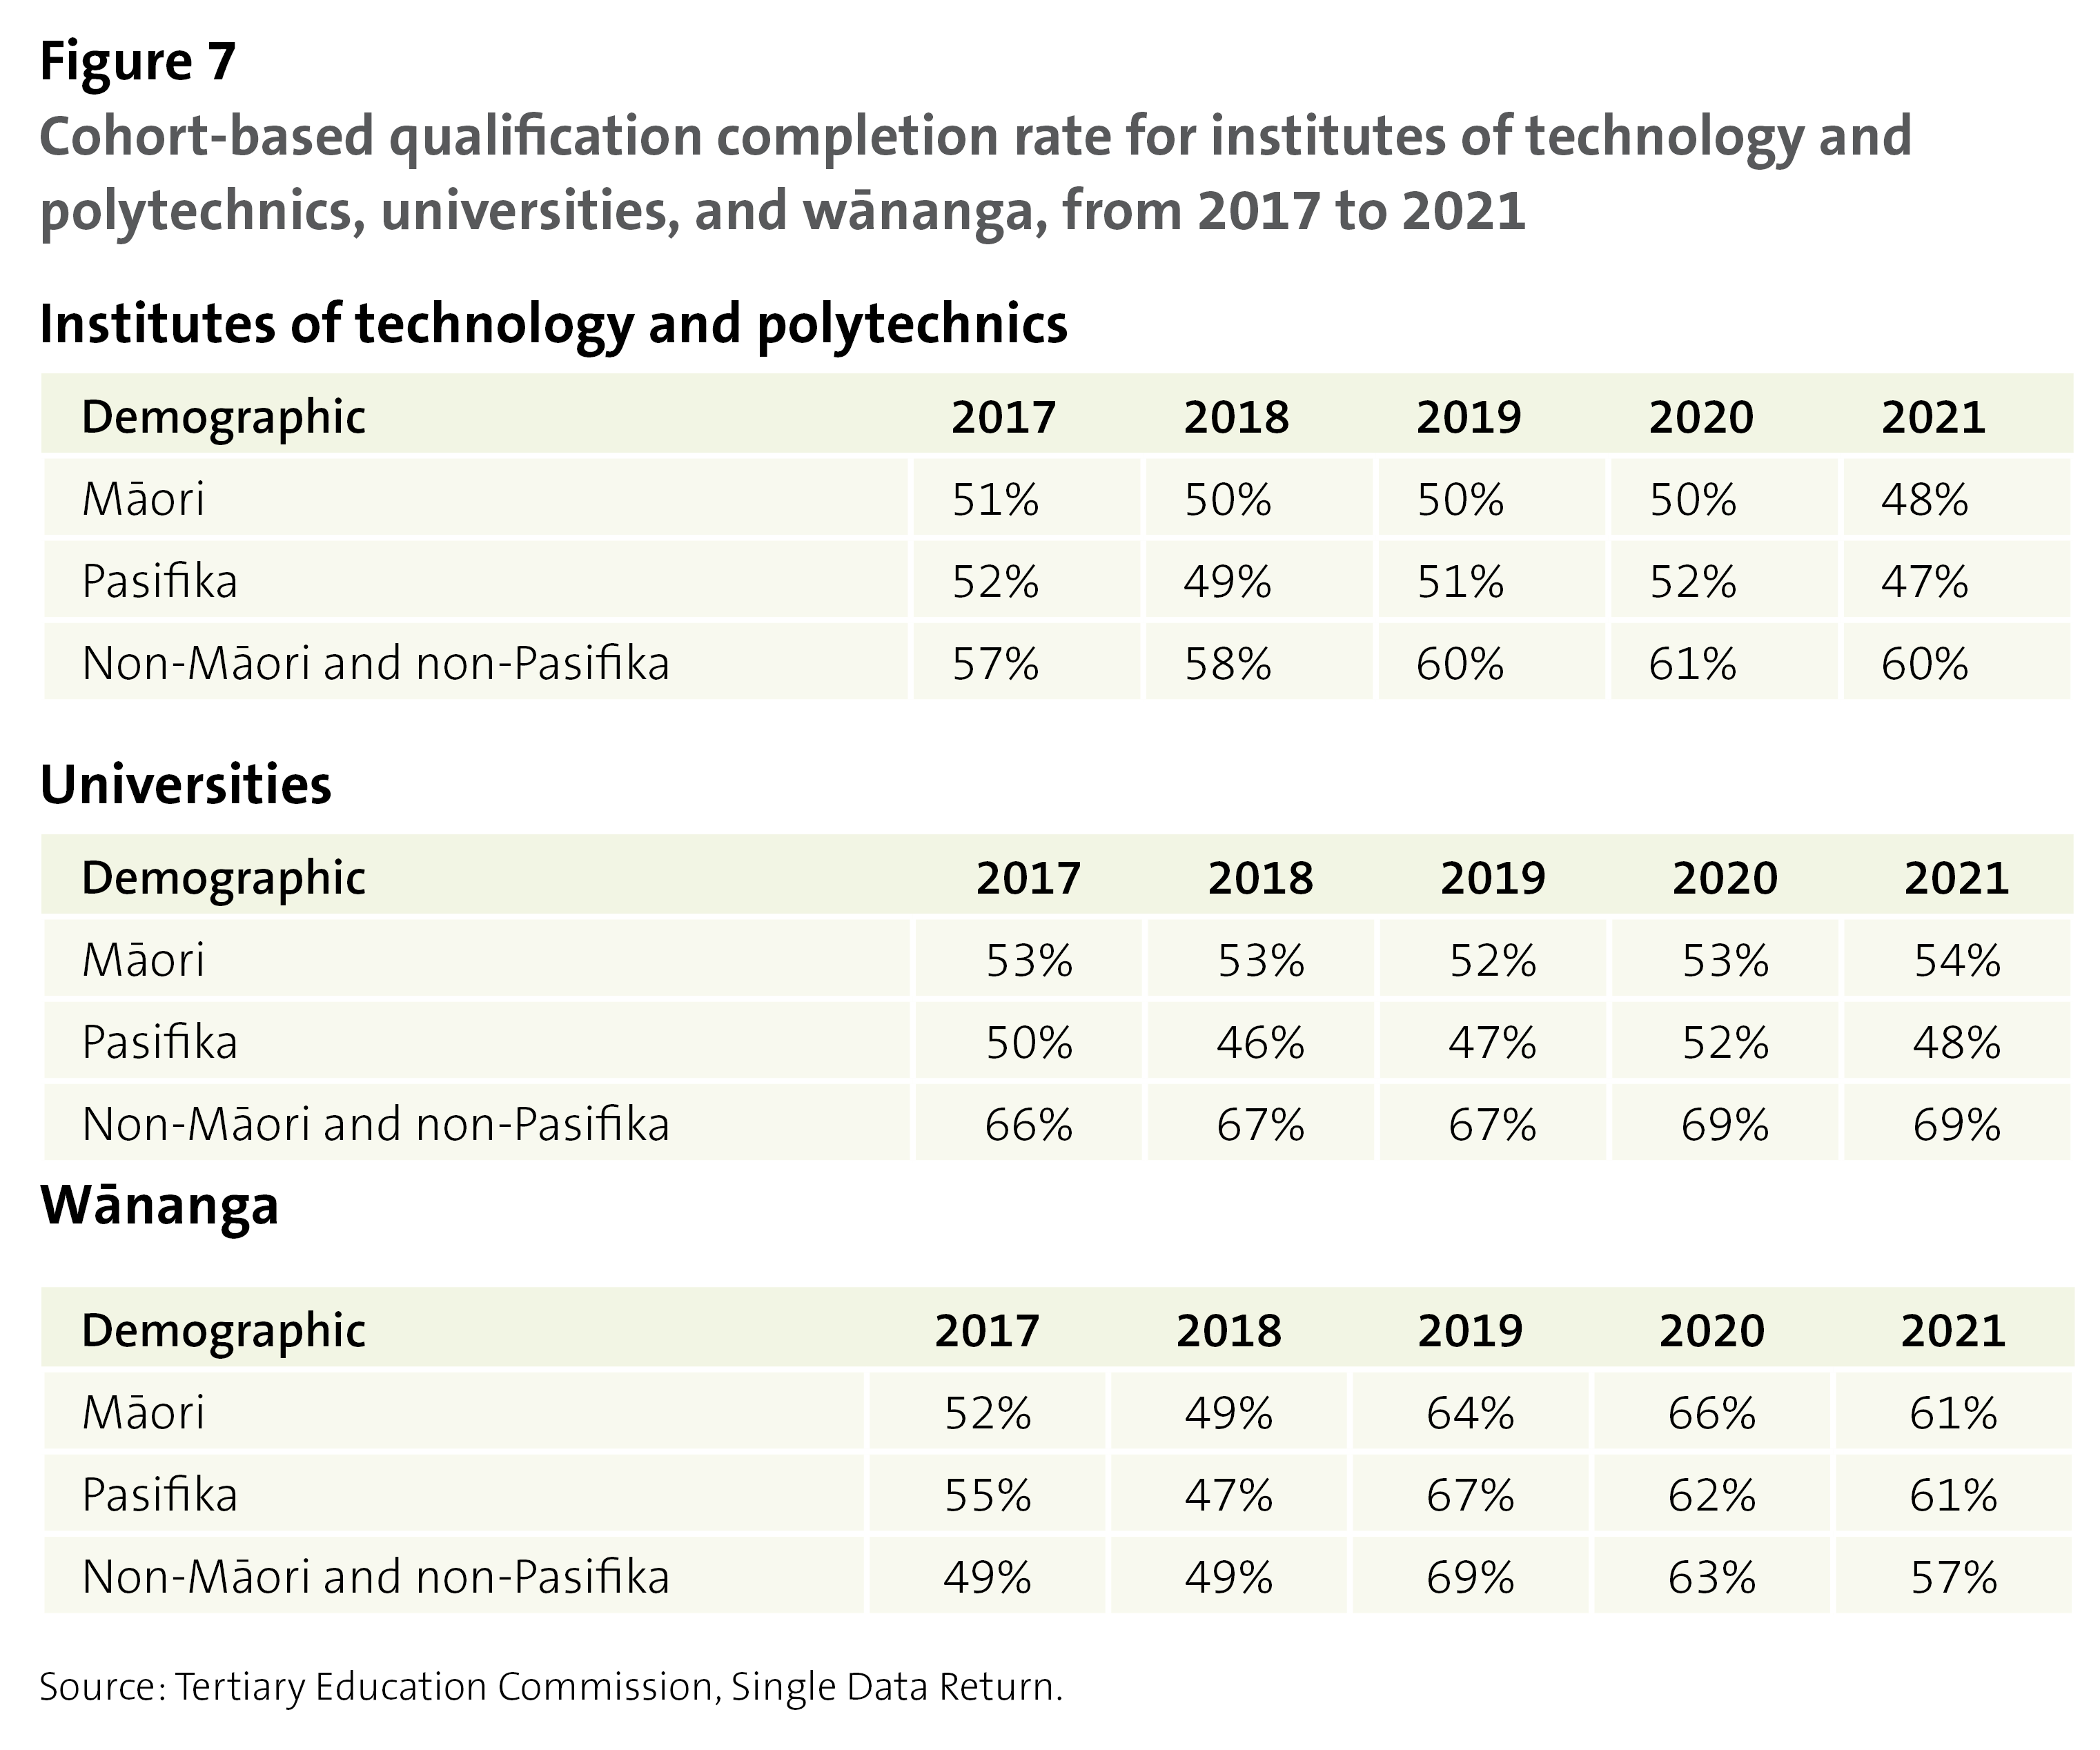 Figure 7: Cohort-based qualification completion rate for institutes of technology and polytechnics, universities, and wānanga, from 2017 to 2021